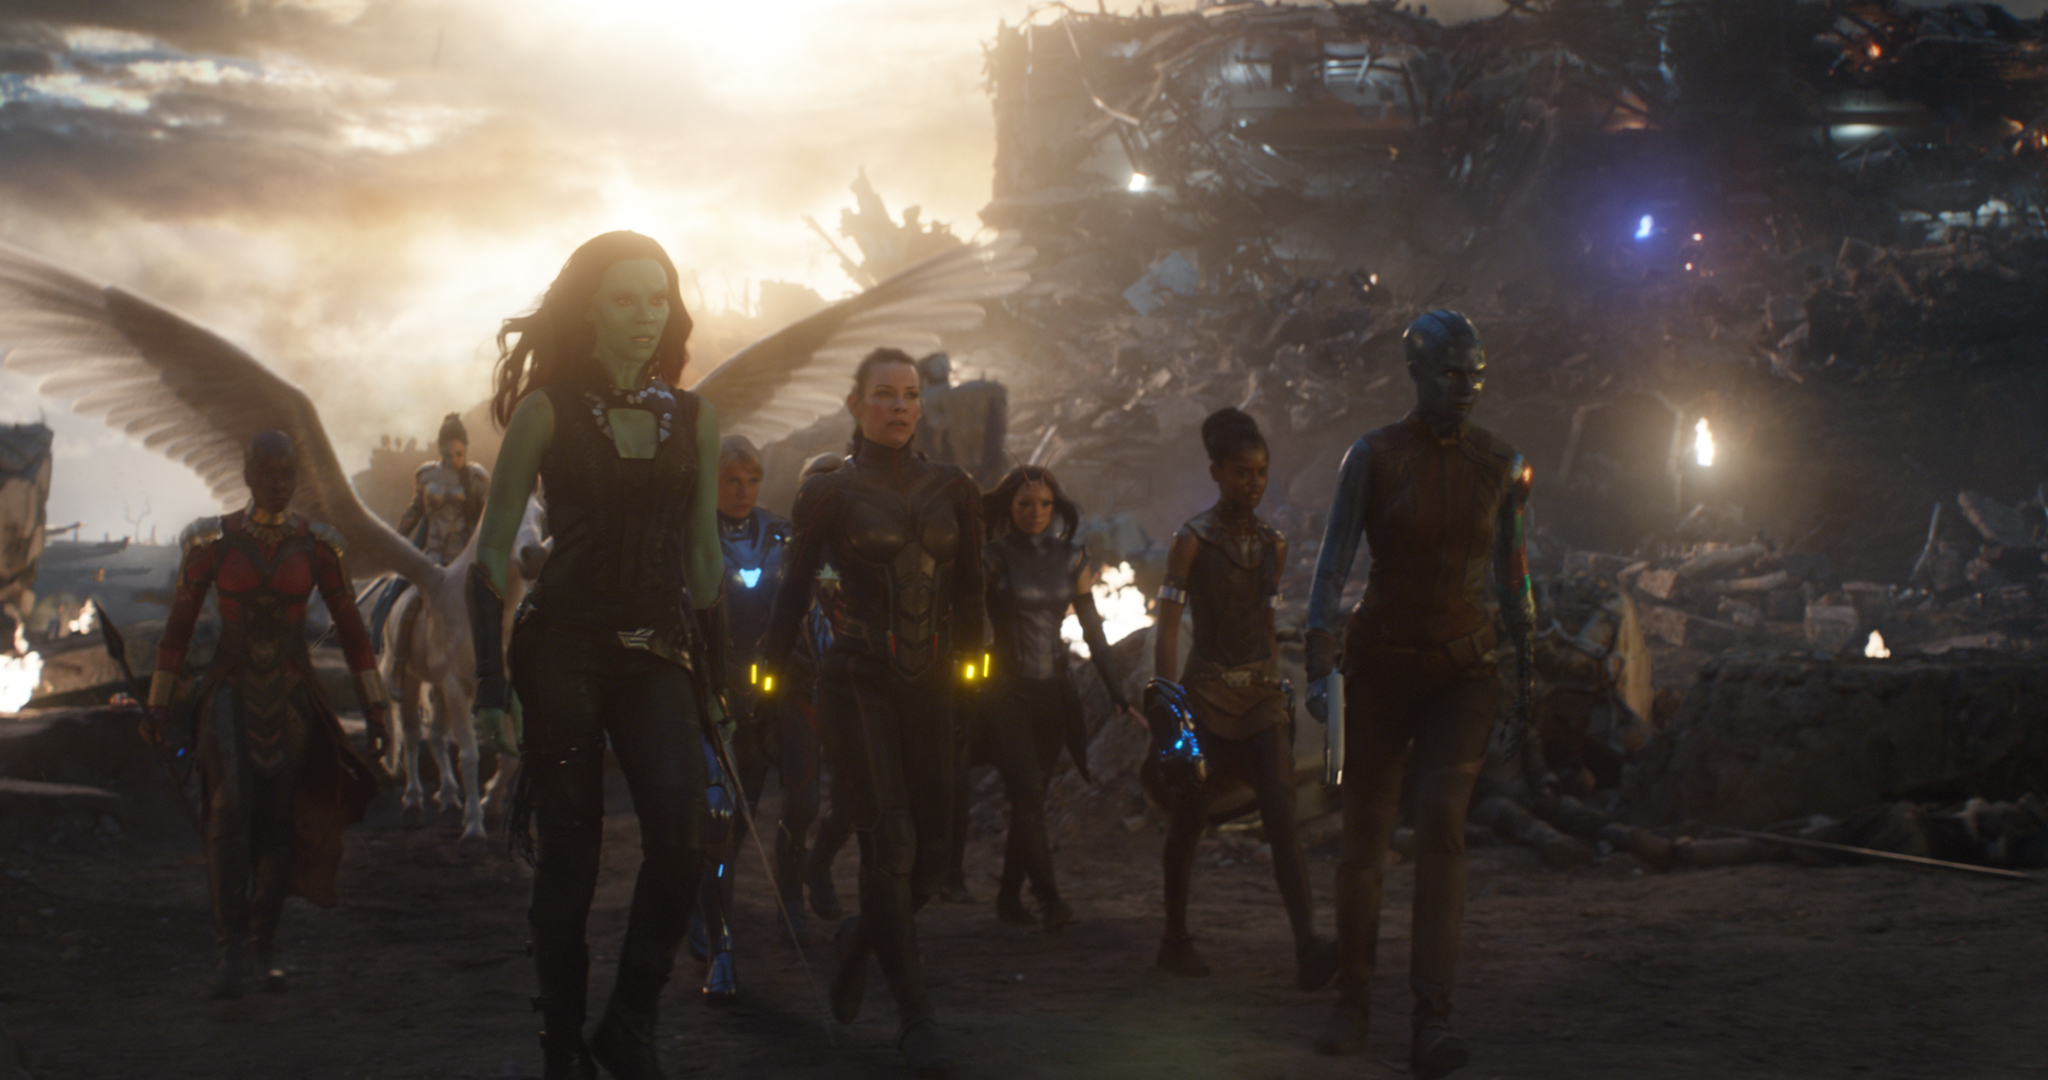 Marvel Studios has now released over twenty stills from the epic compound a...